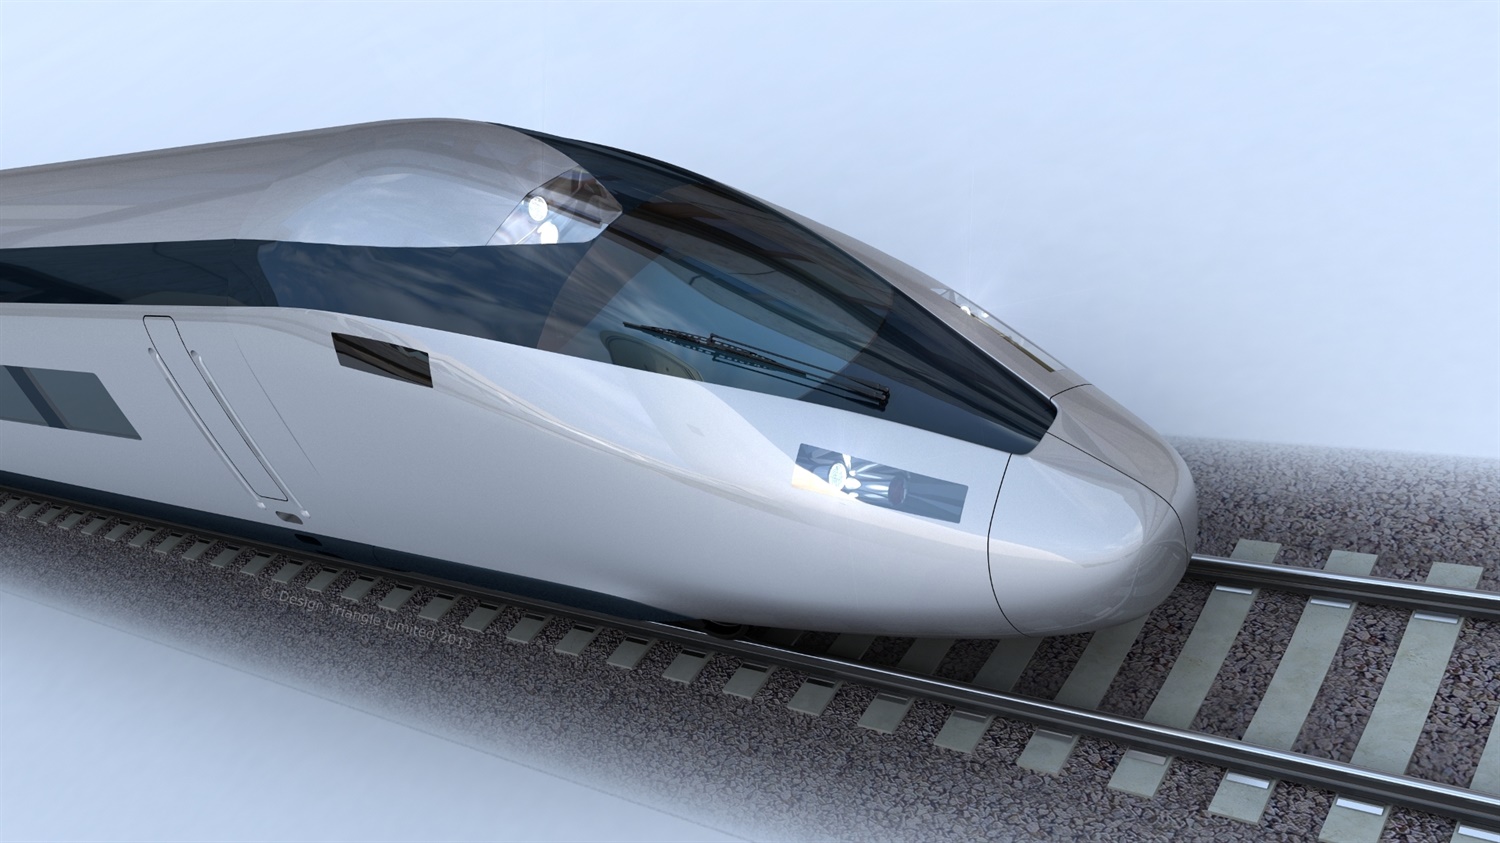 HS2 potential to northern connectivity not to be underestimated, says Percy